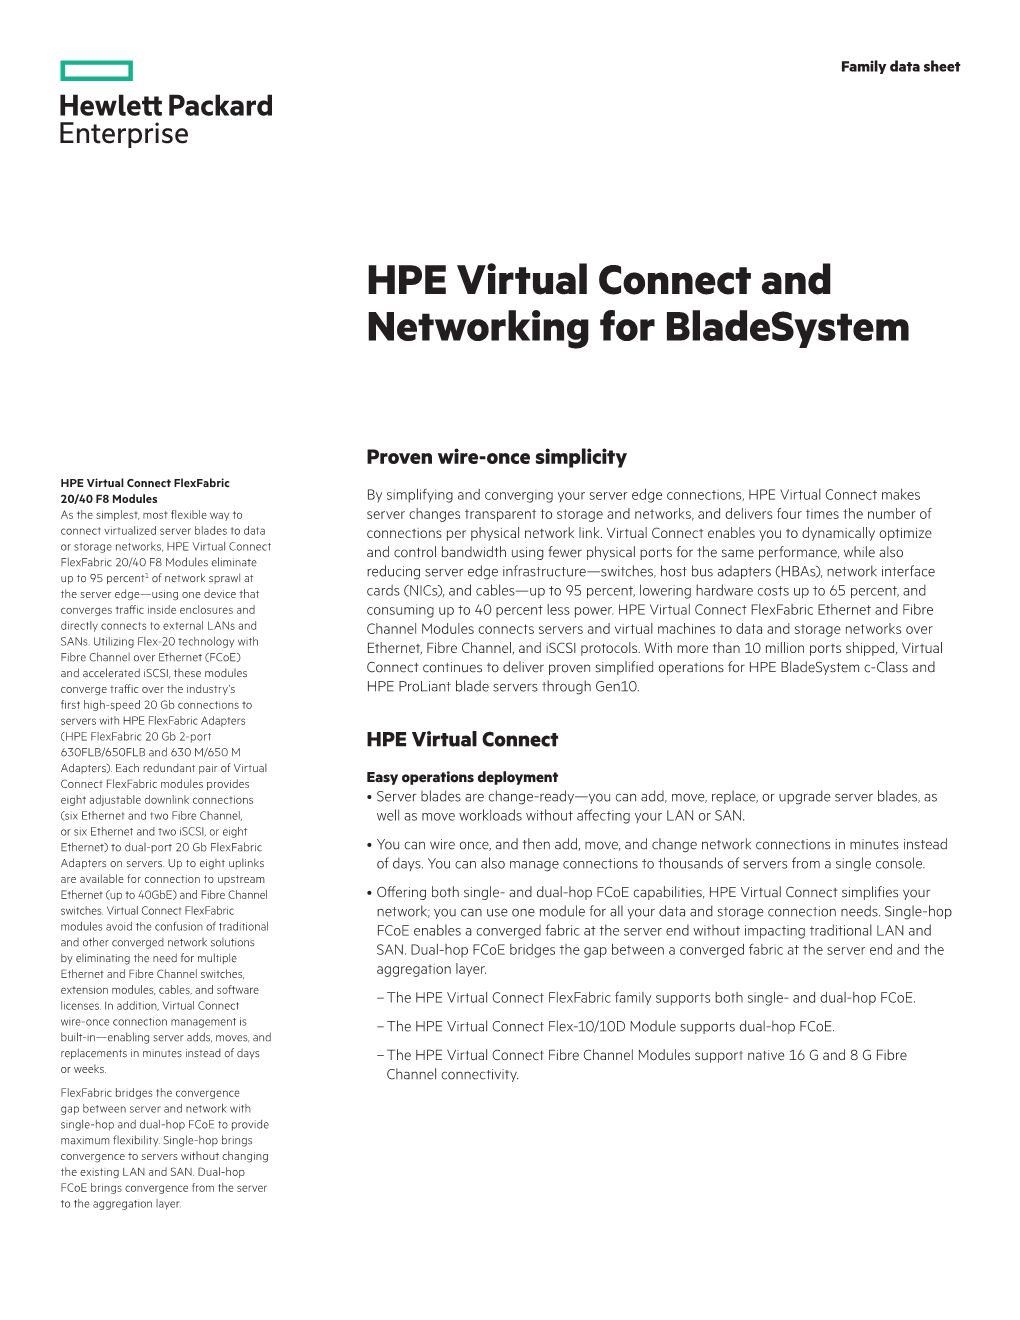 HPE Virtual Connect and Networking for Bladesystem